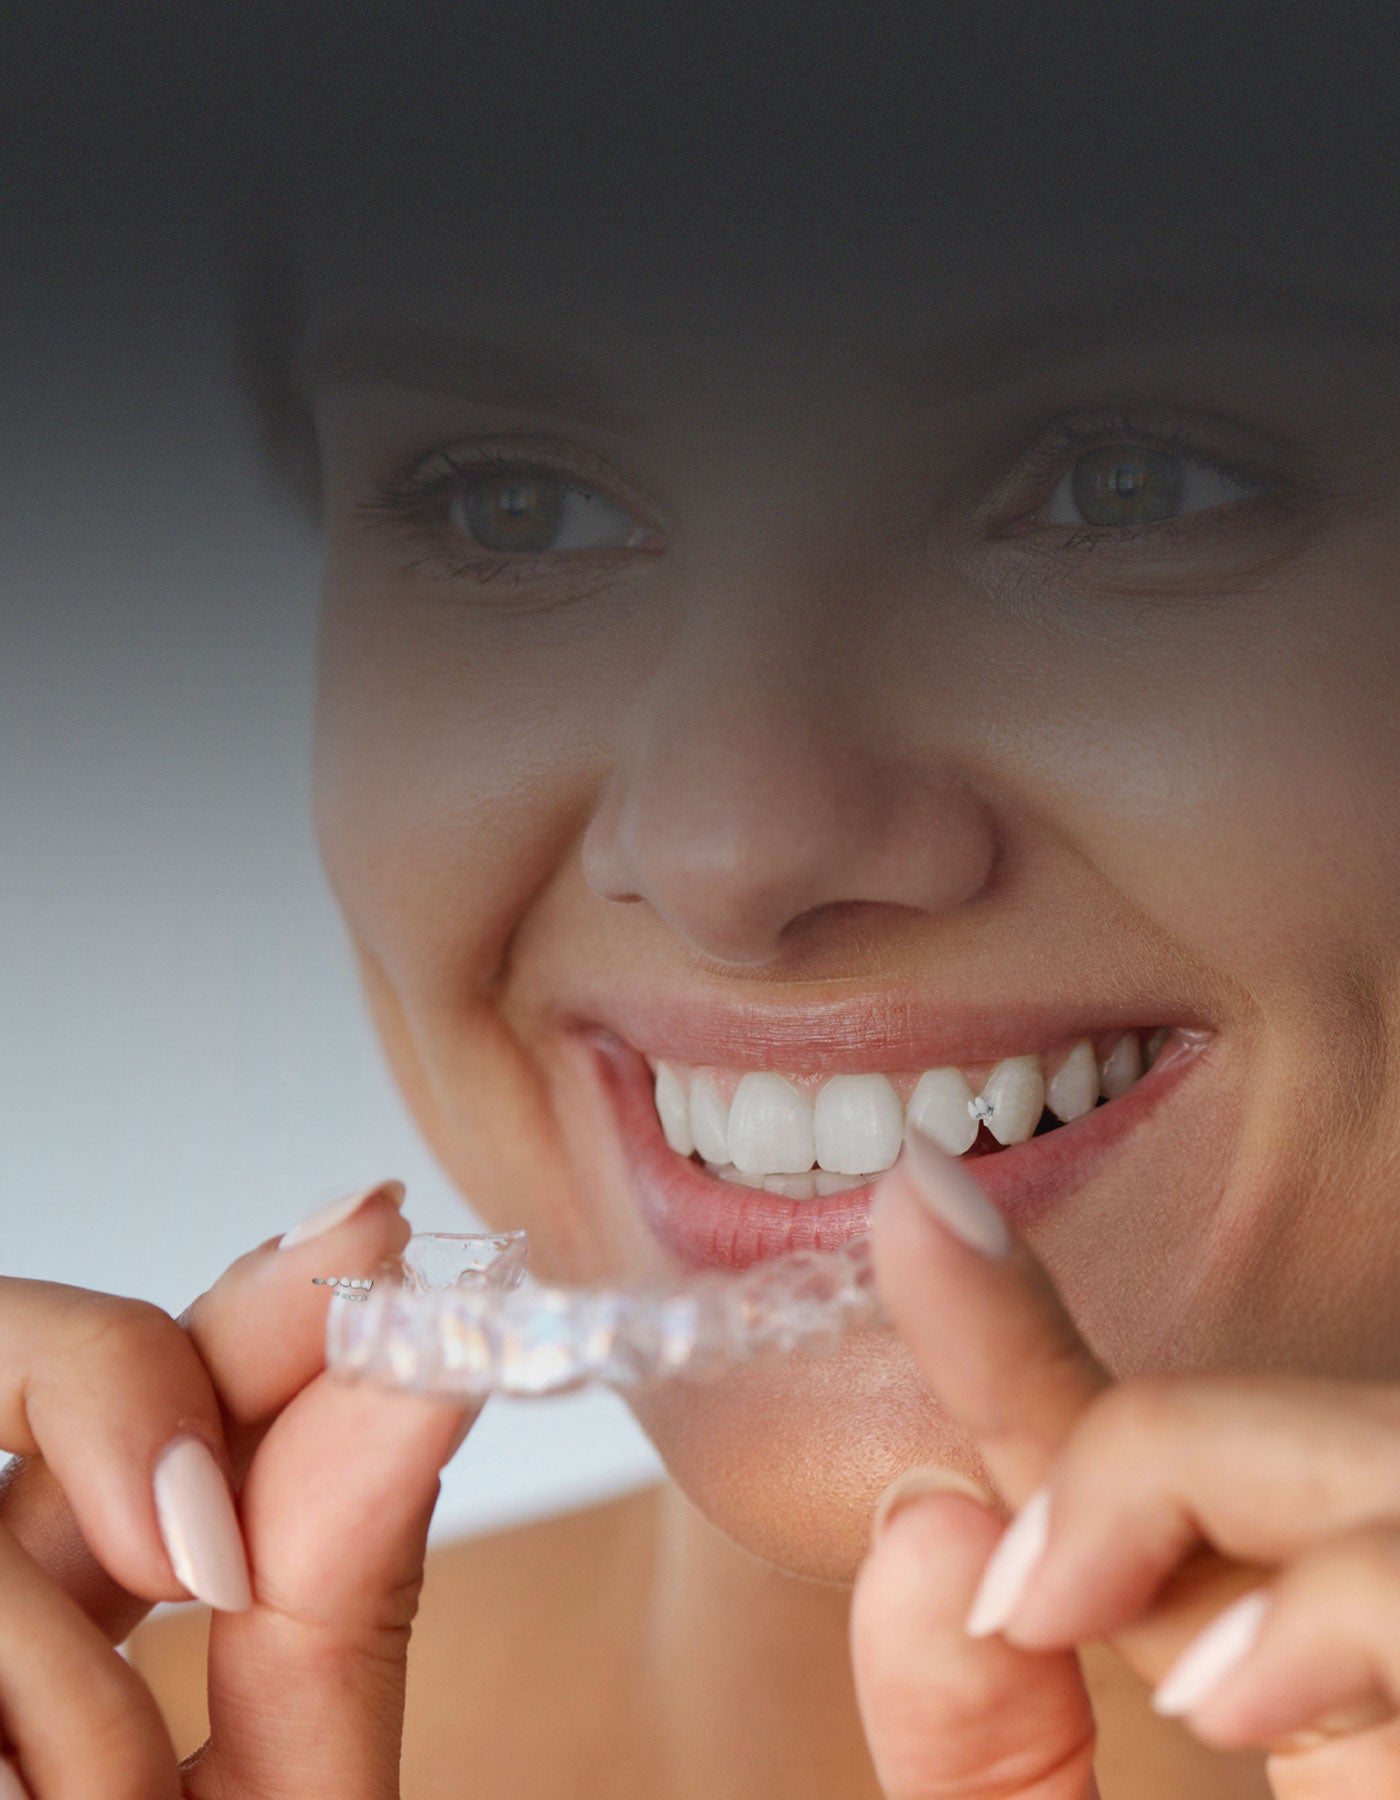 Lady holding a clear aligner for teeth straightening